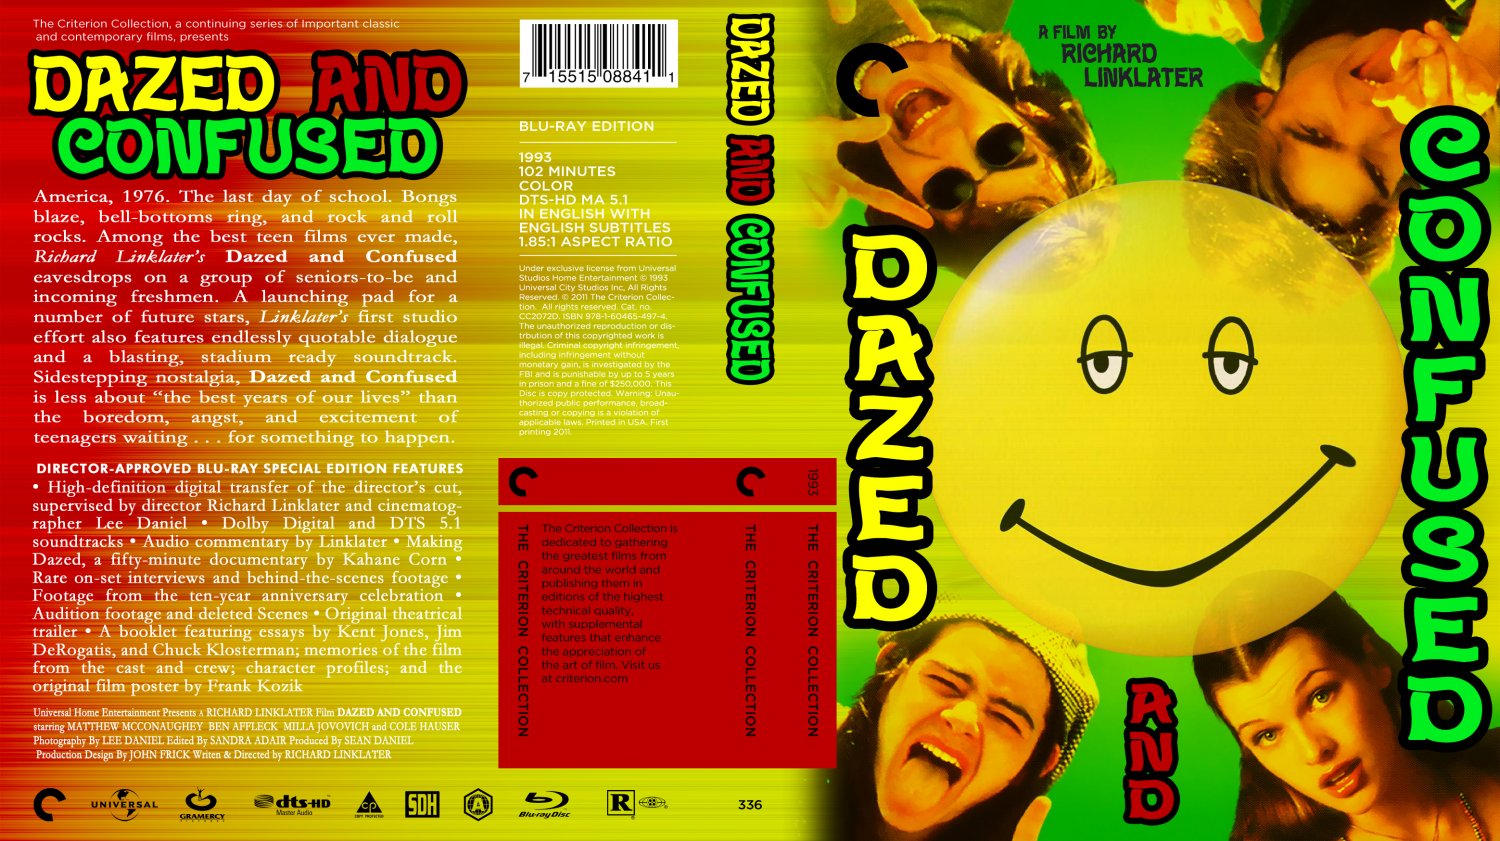 Dazed And Confused Movie Blu Ray Custom Covers Dazedandconfusedbrcriterioncltv1 Dvd Covers 